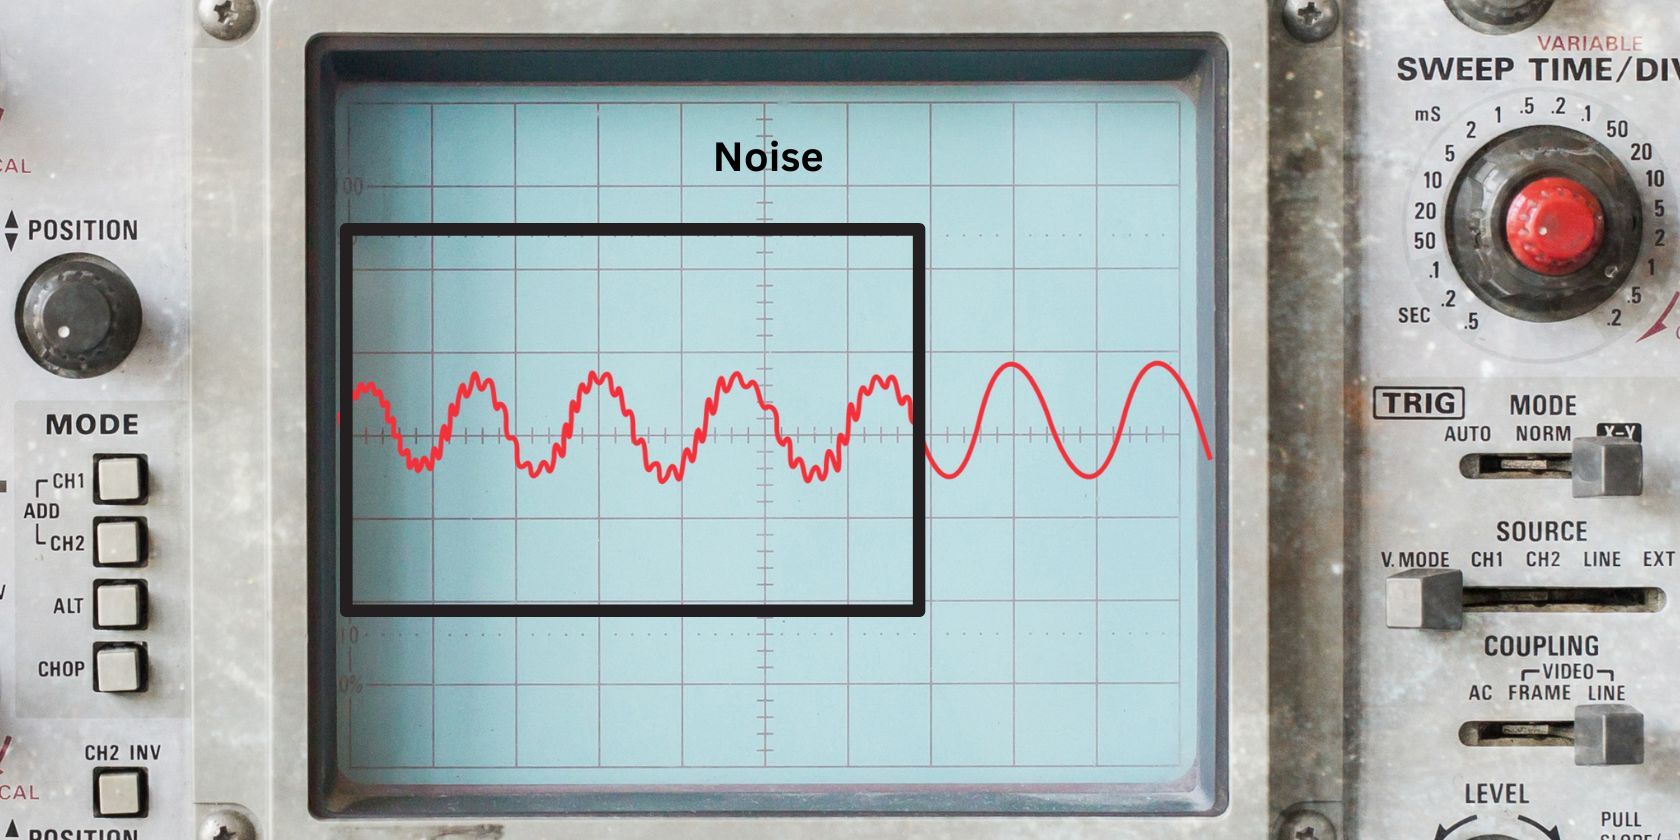 Electrical noise signal